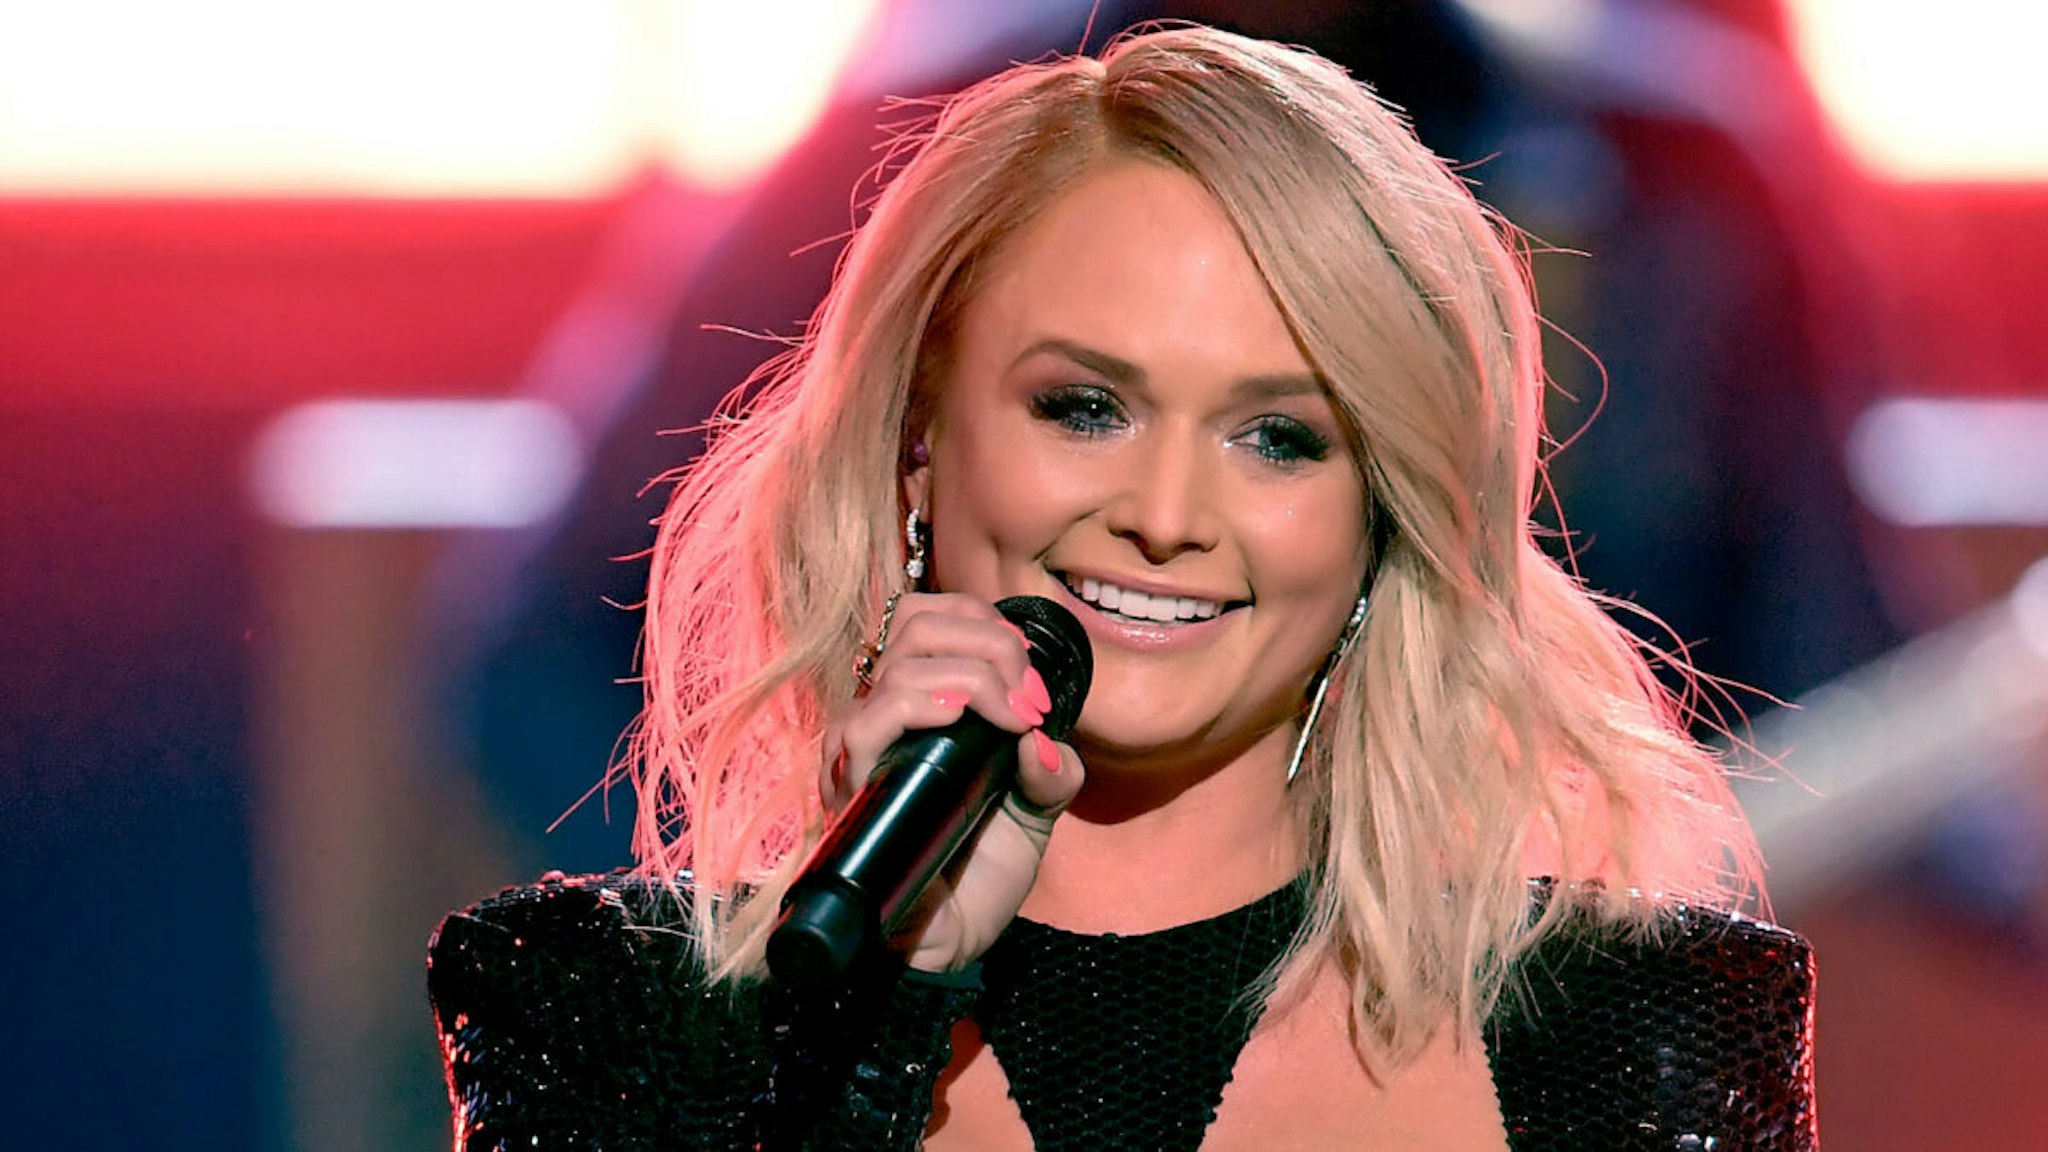 Miranda Lambert performs onstage during the 54th Academy Of Country Music Awards at MGM Grand Garden Arena on April 07, 2019 in Las Vegas, Nevada.